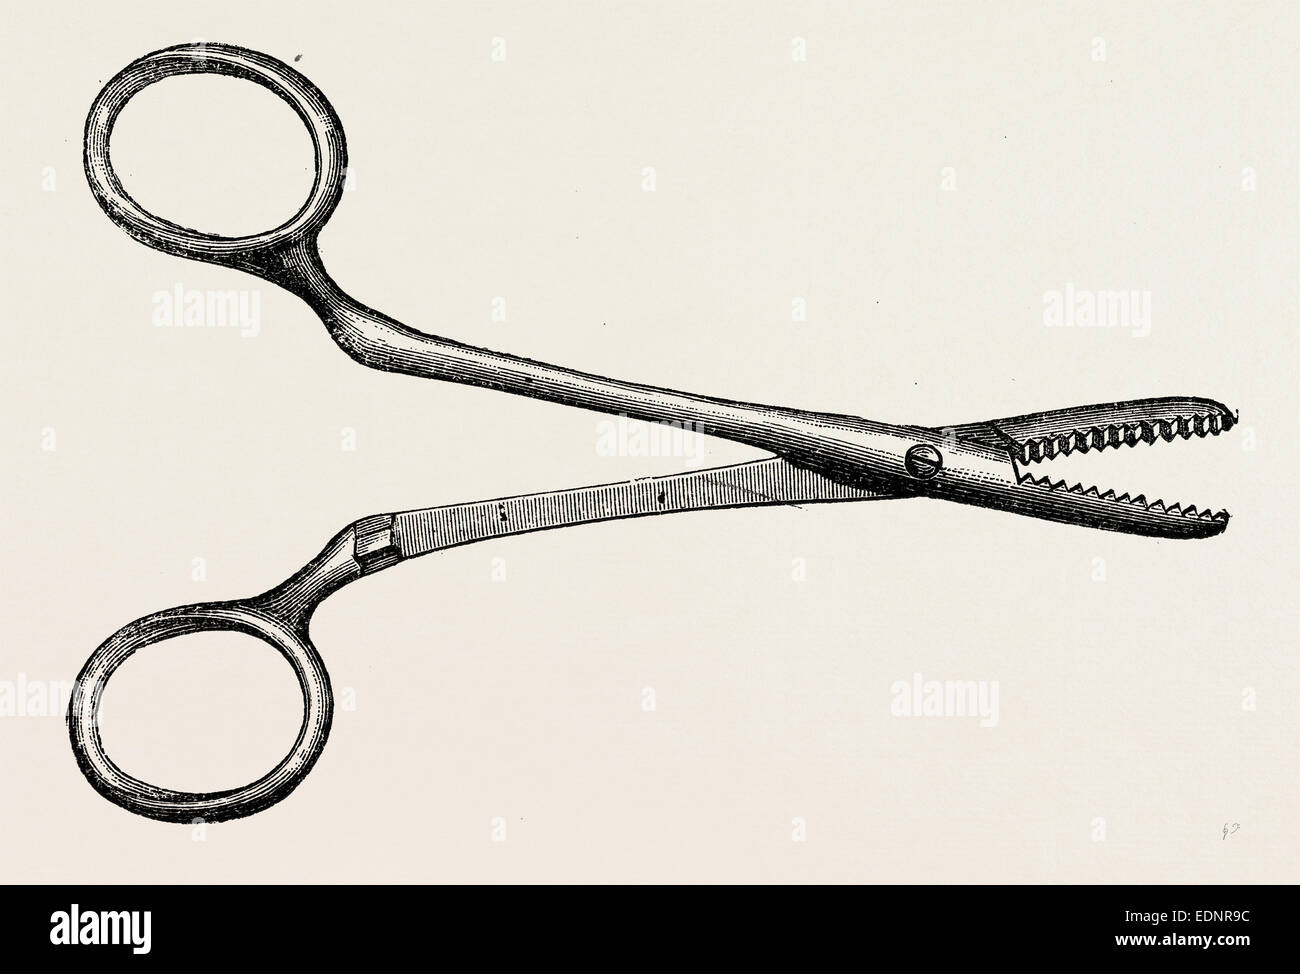 spencer wells's artery forceps, medical equipment, surgical instrument, history of medicine Stock Photo